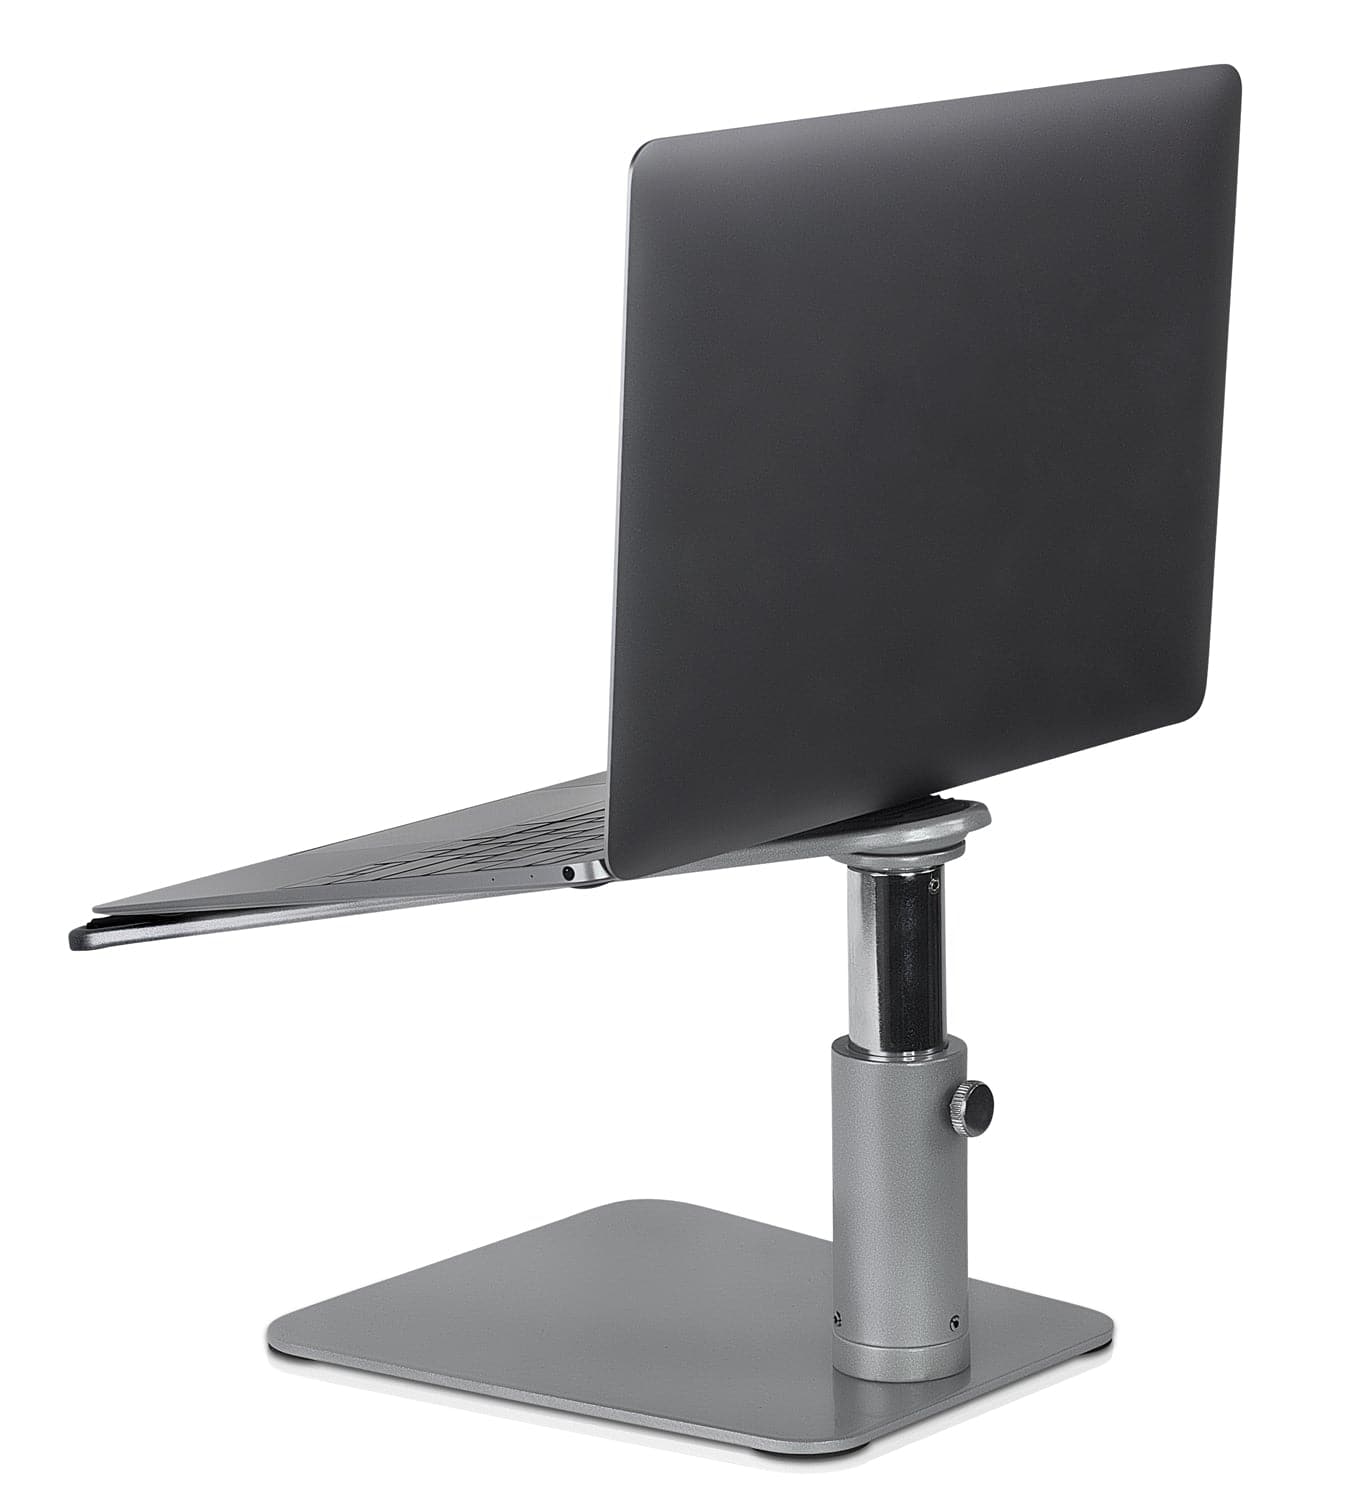  Customer reviews: The Hold It All In One Laptop Stand